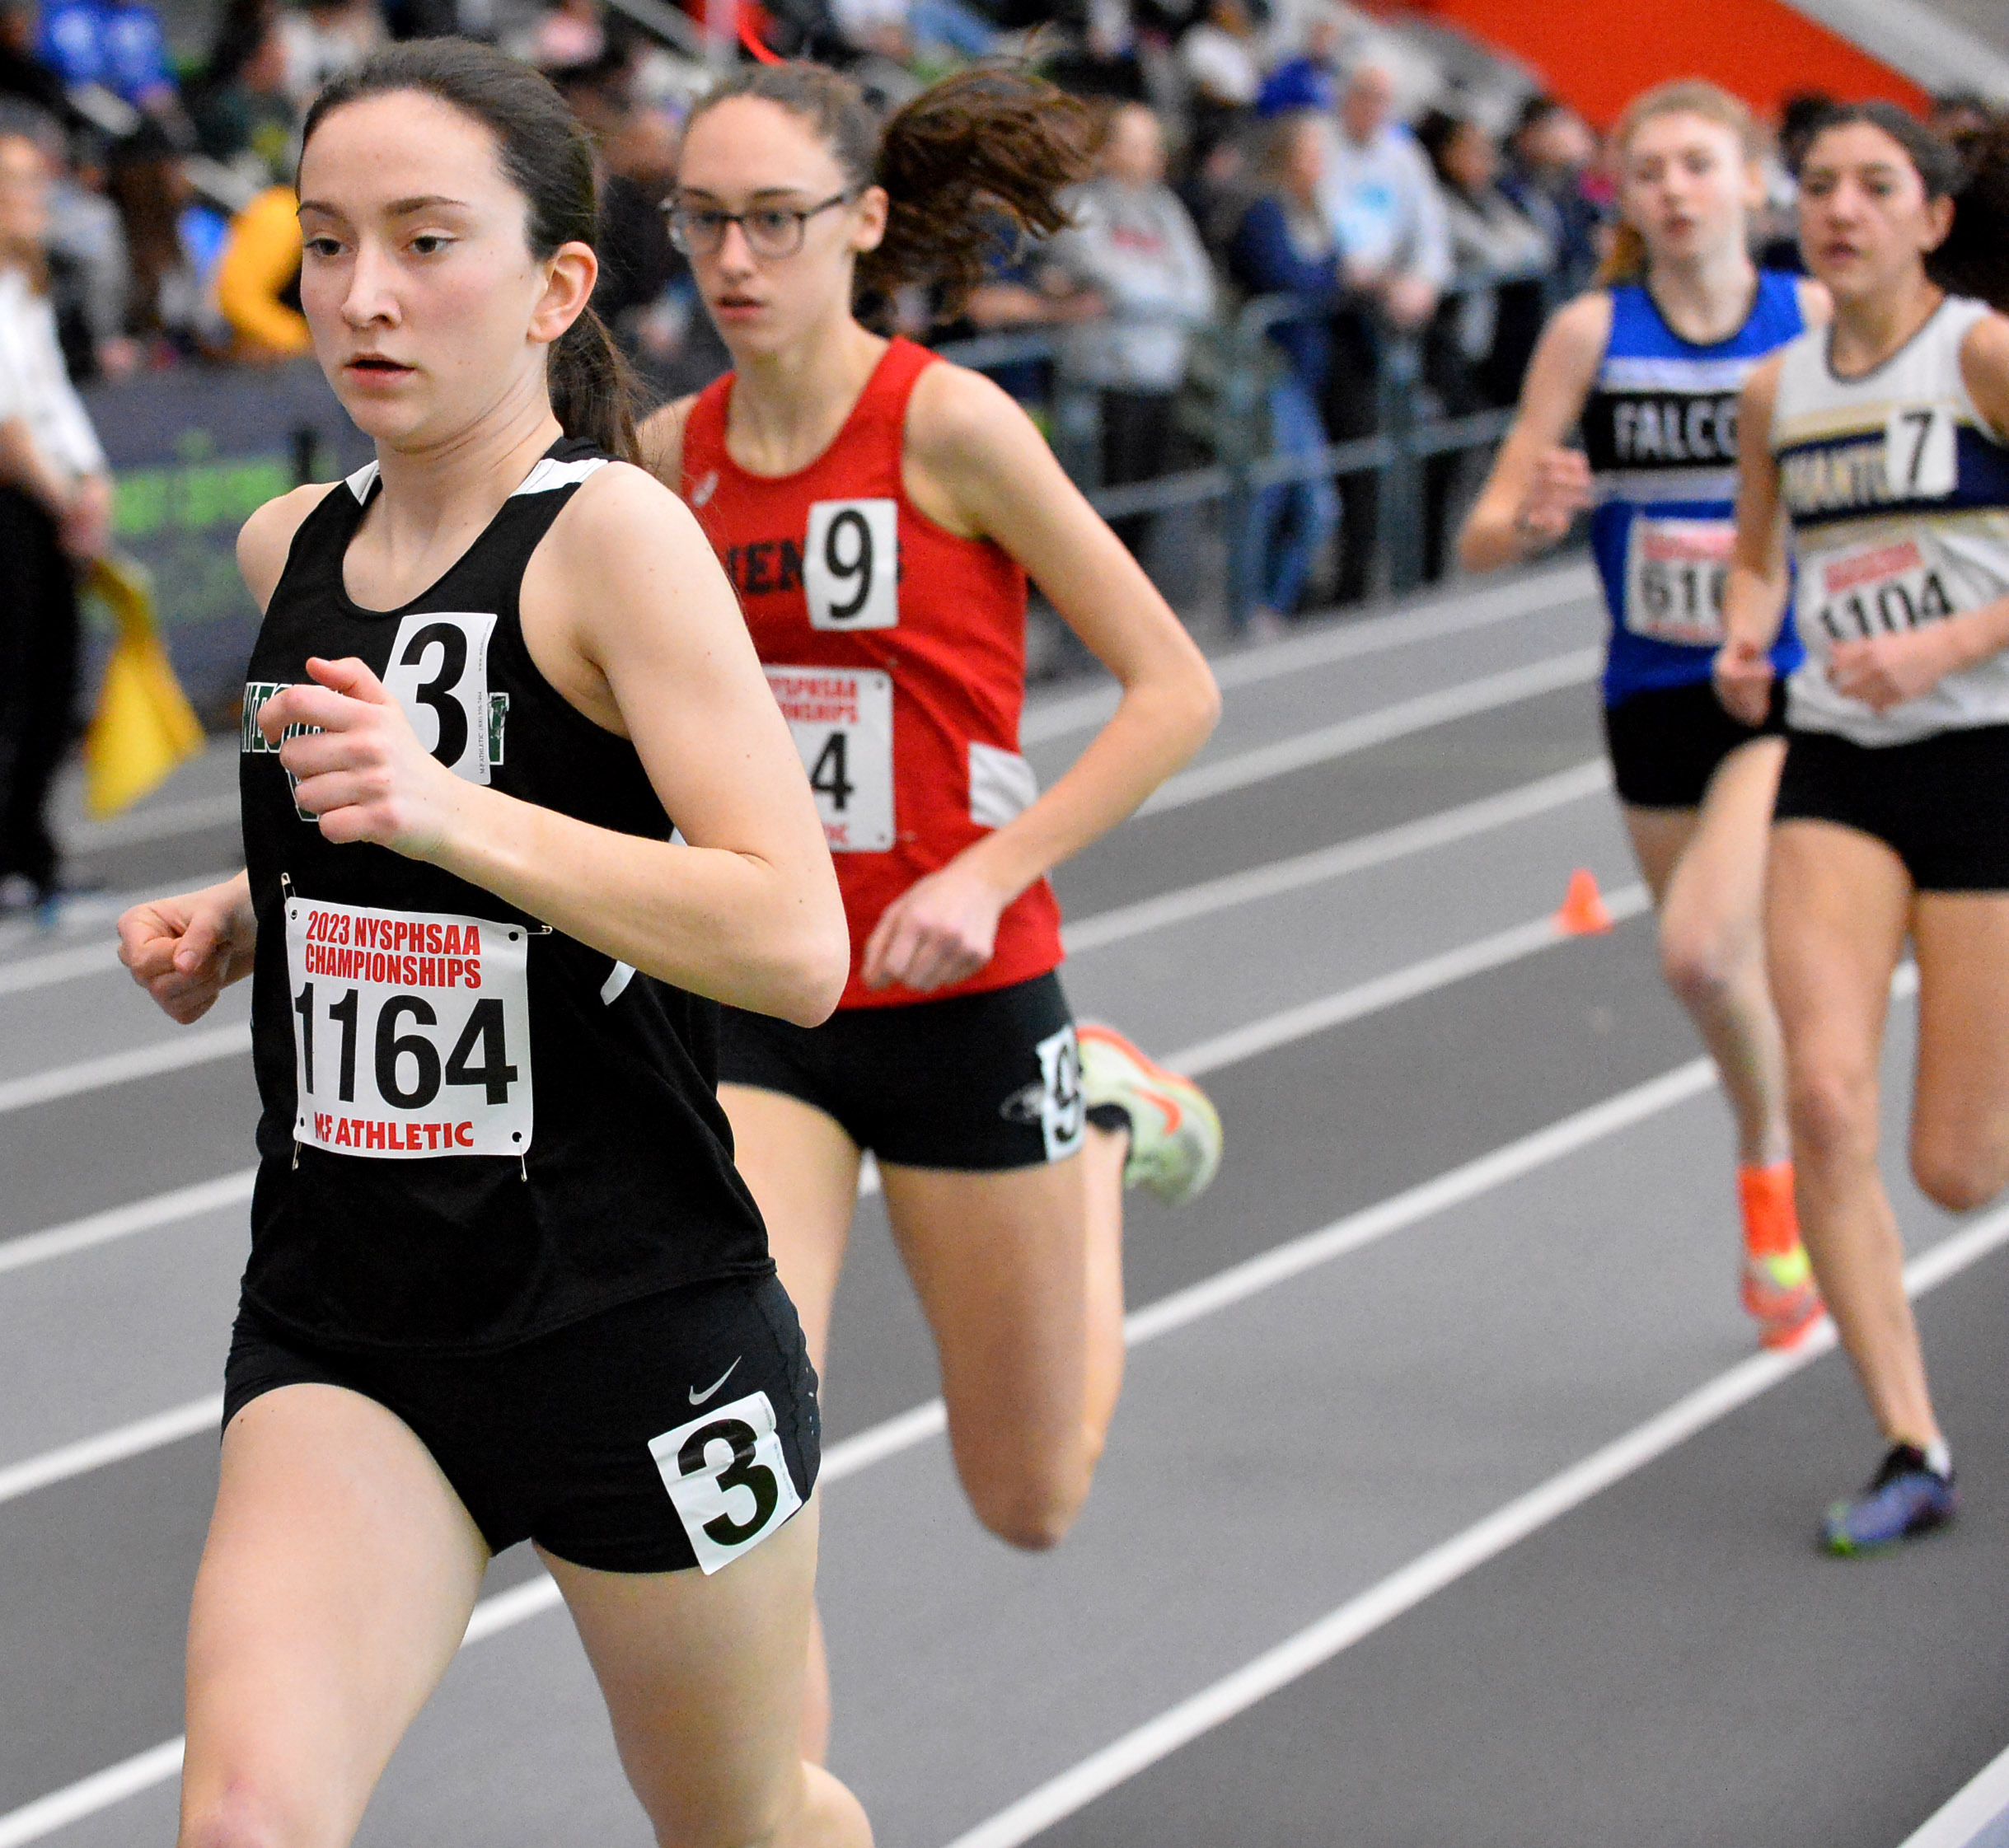 Westhampton Beach sophomore Lily Strebel reached the podium in both the 1,000- and 1,500-meter races on Saturday.    DAMION REID